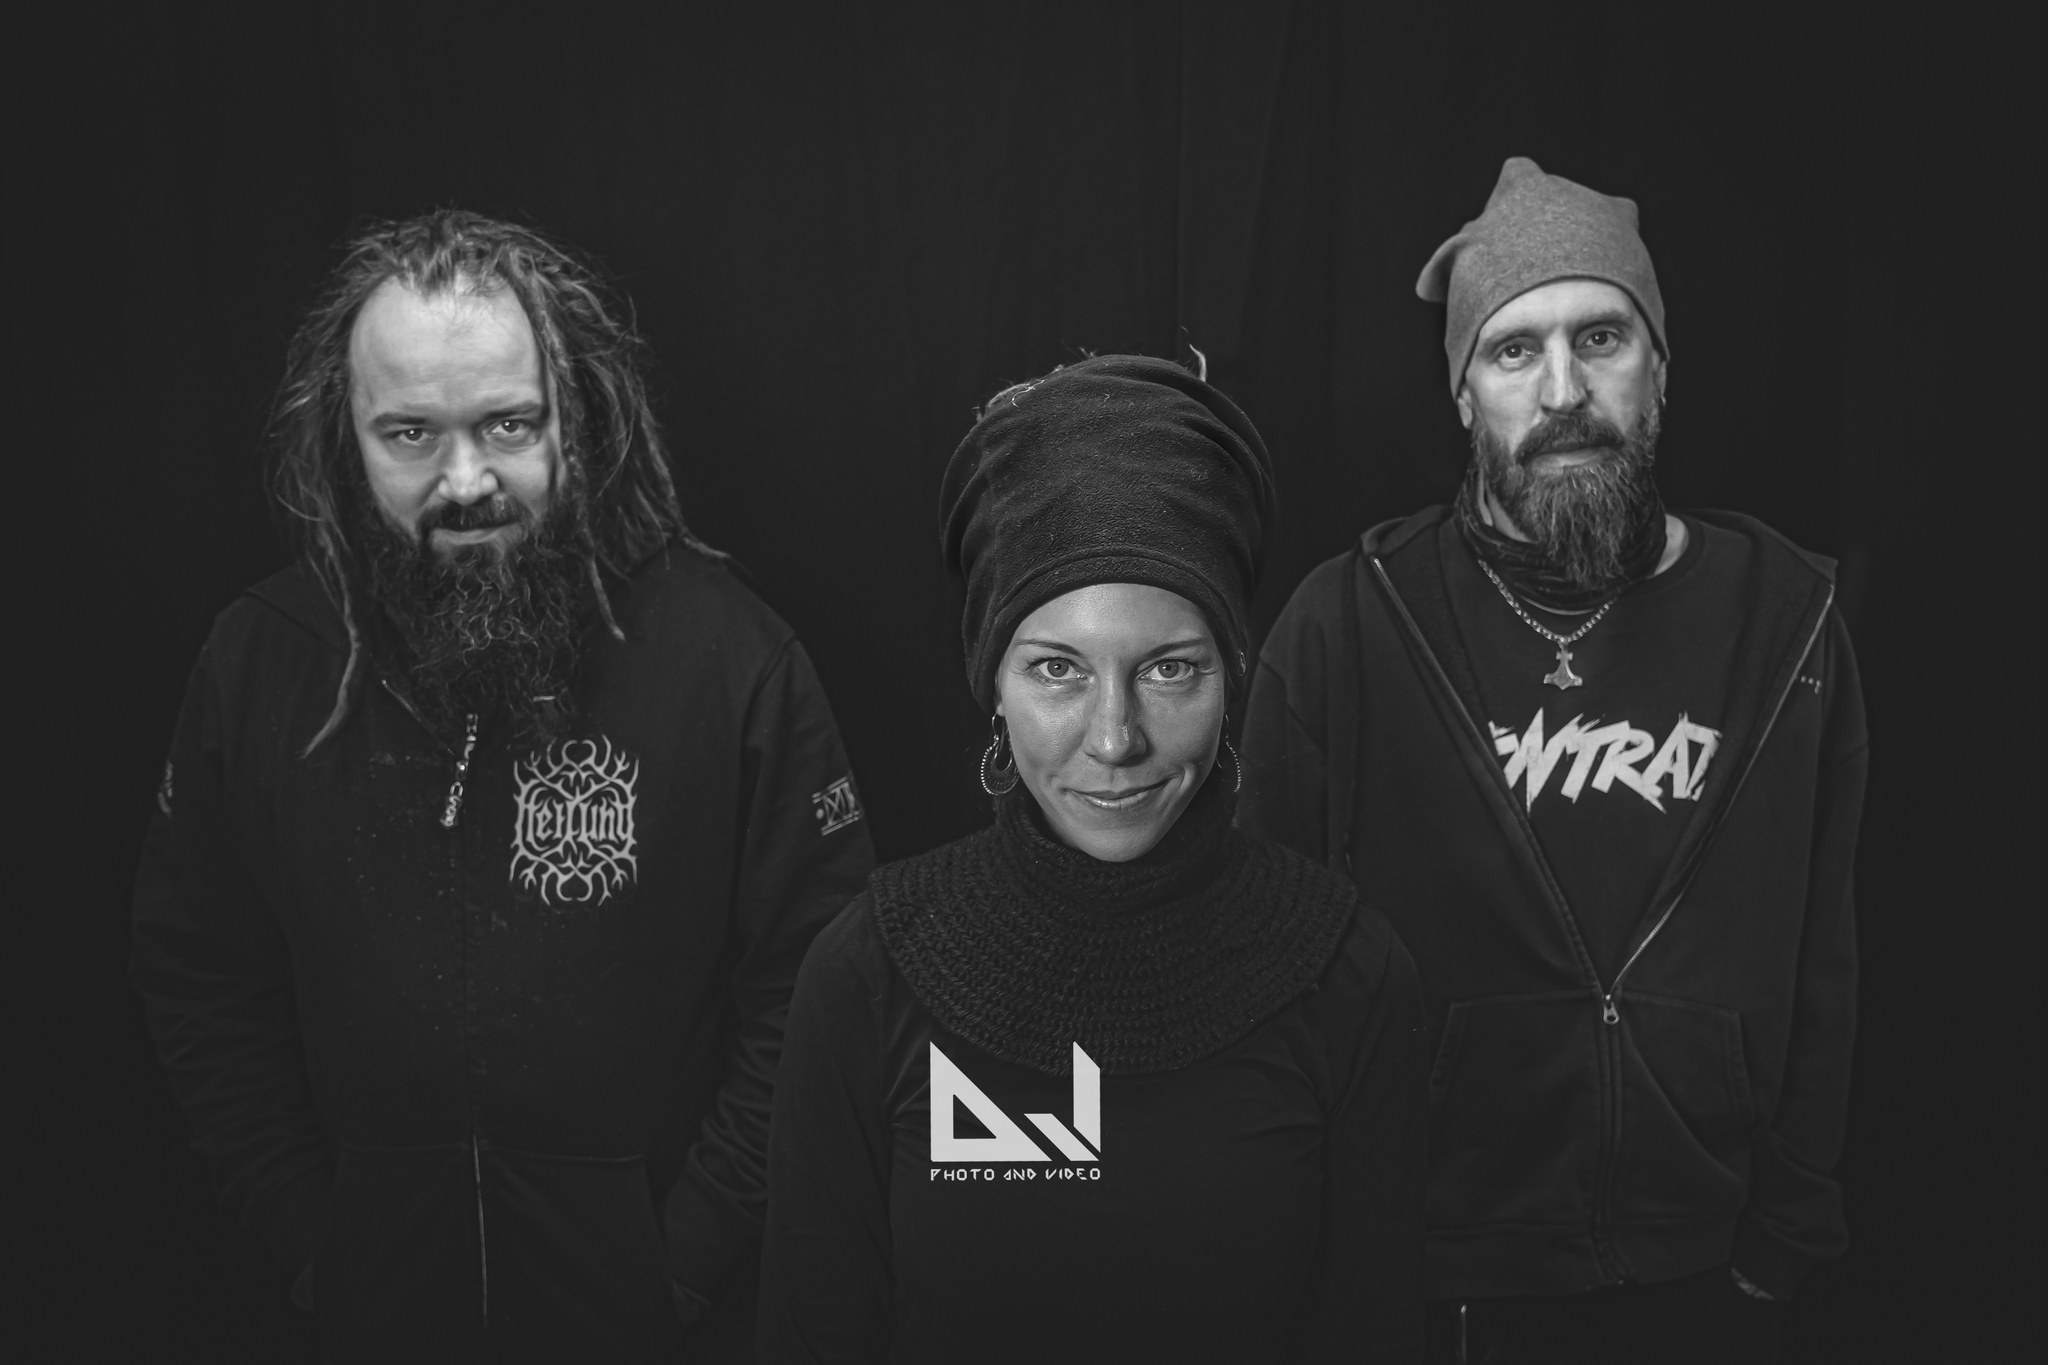 Bone drumming and mythological tones Interview with Heilung Chaoszine